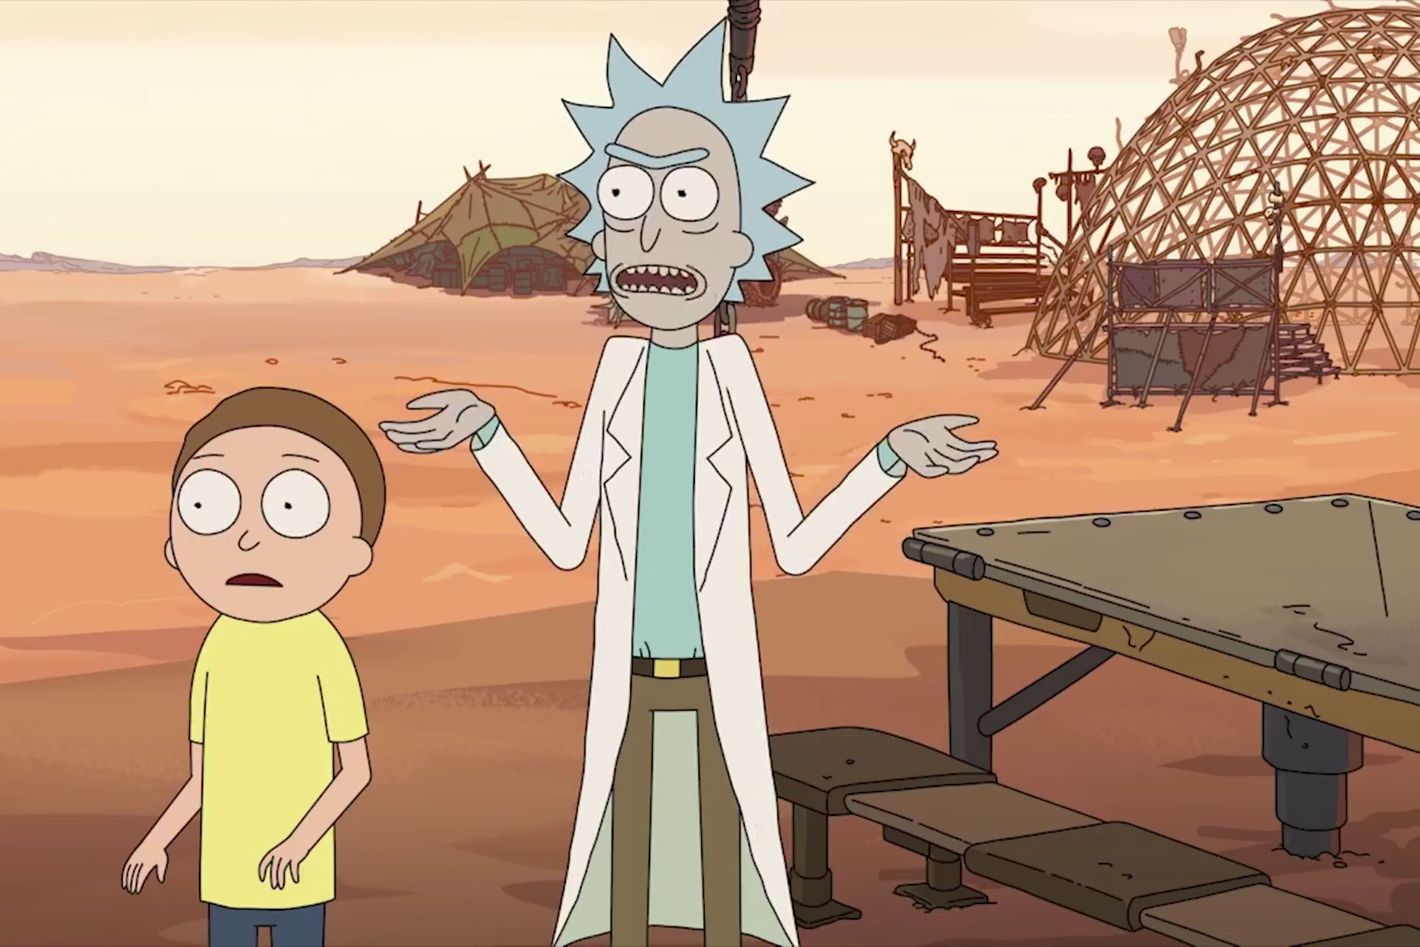 Ricking Morty S3E2, Rick and Morty